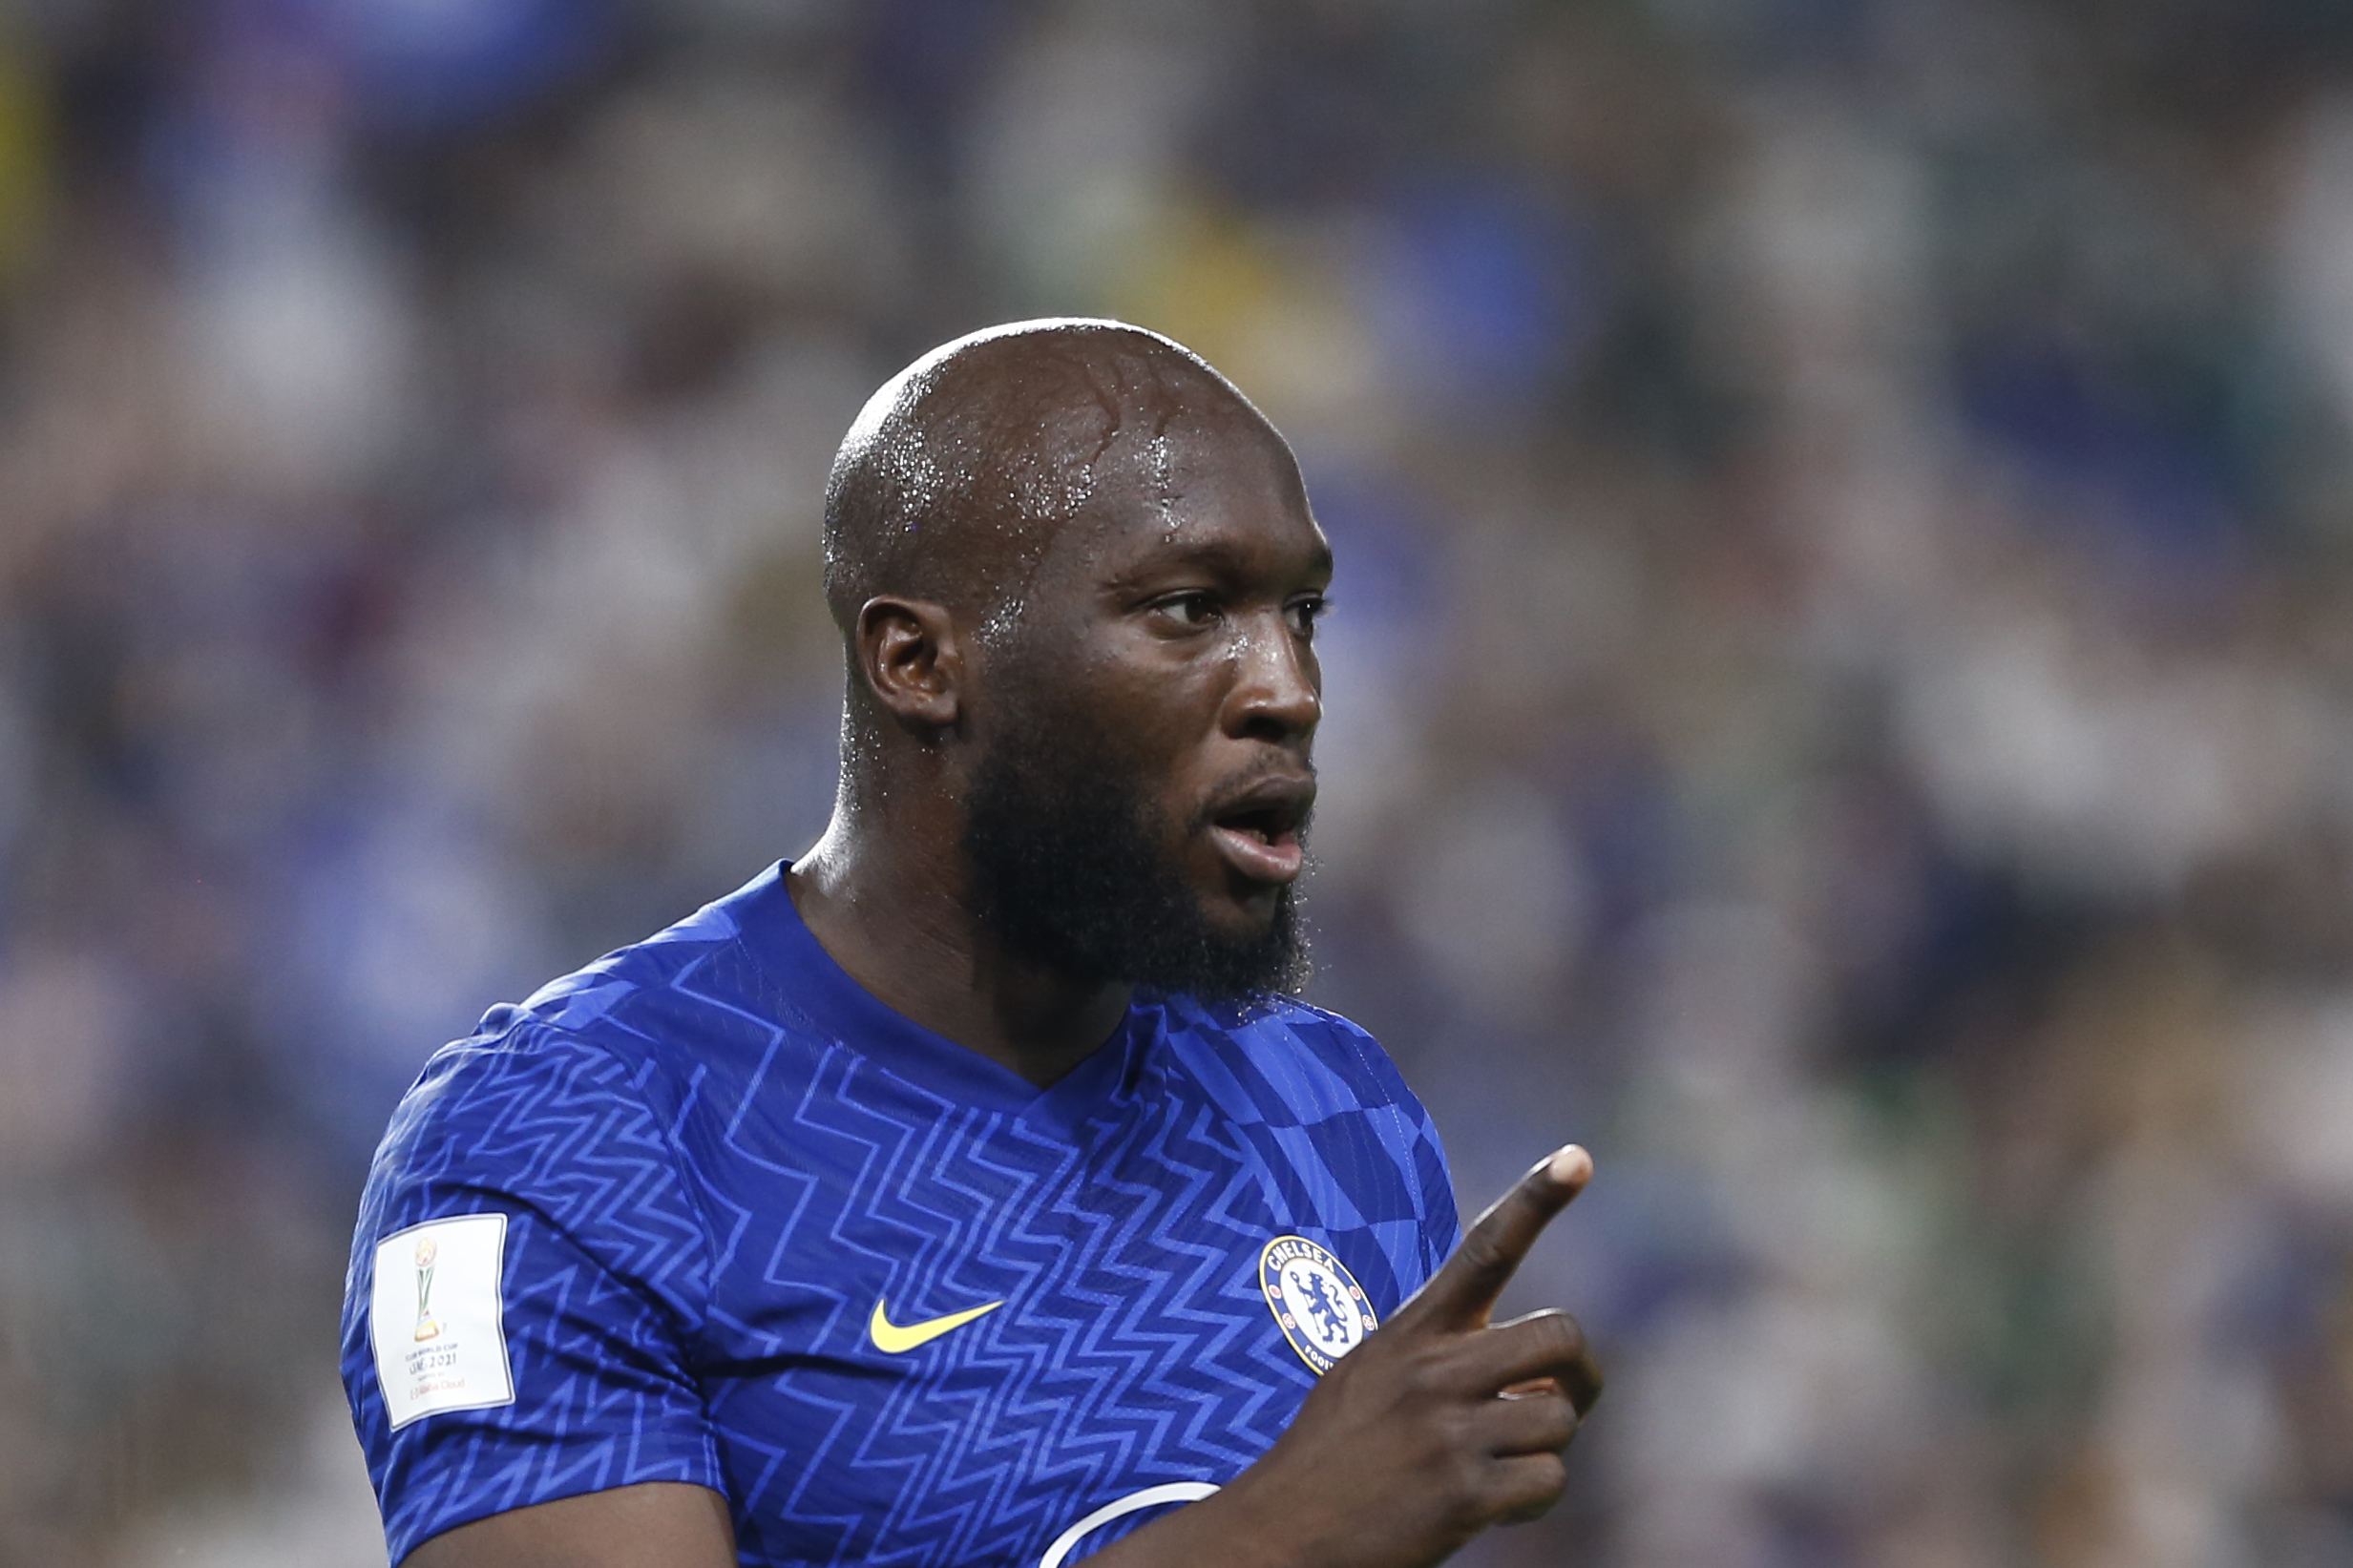 'Combine a lot': Chelsea player says him and Romelu Lukaku link up loads in training